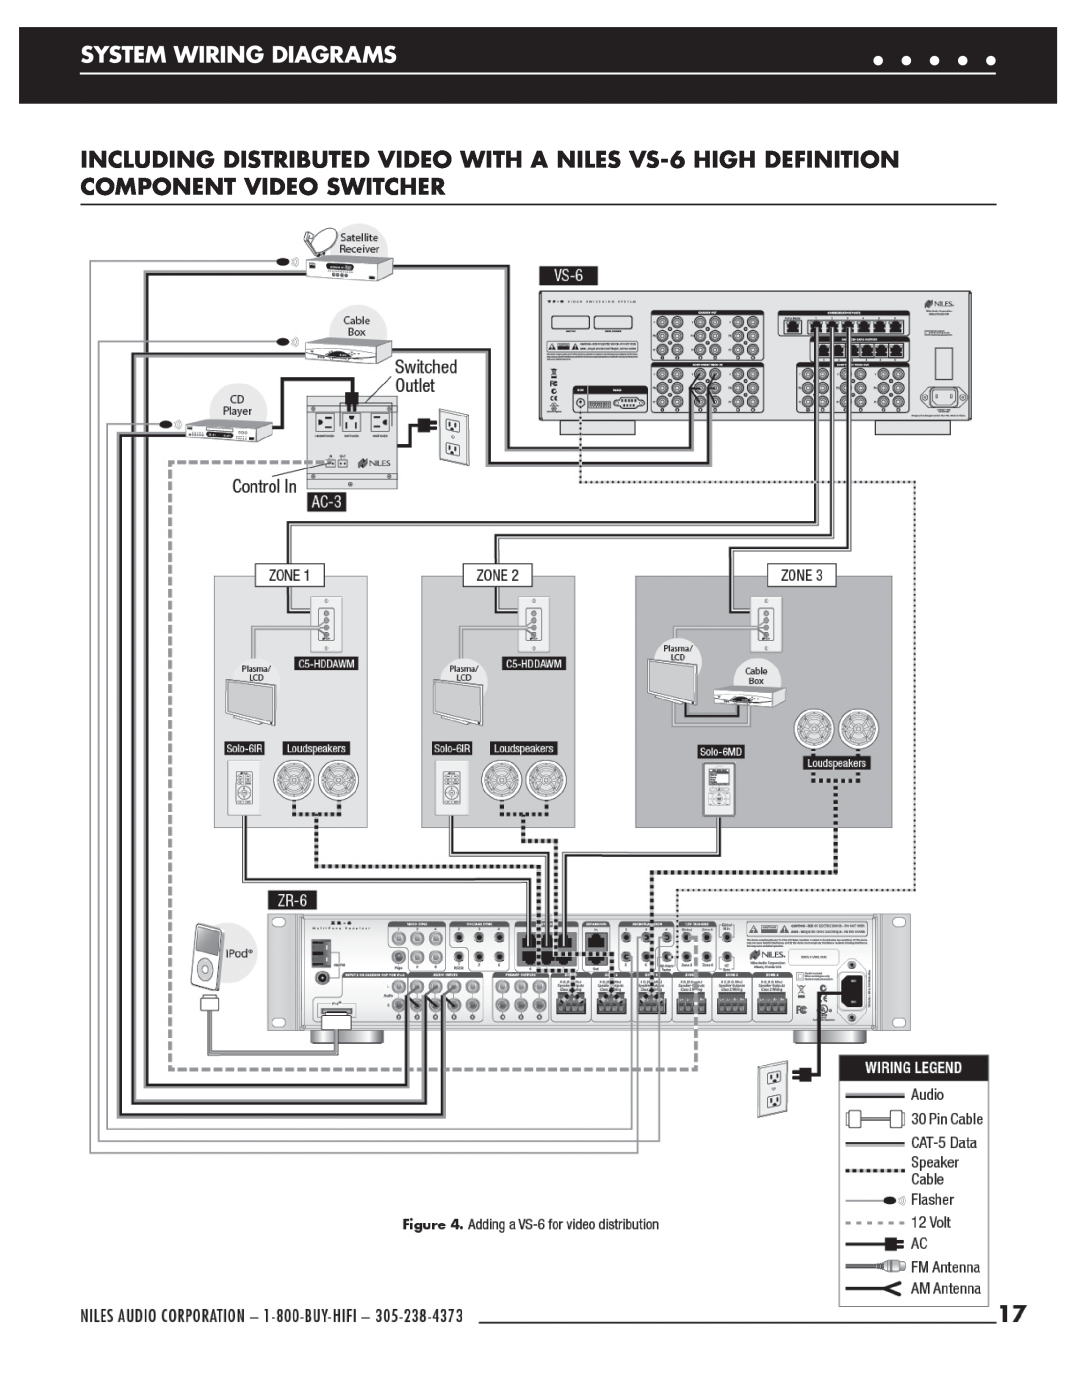 Niles Audio ZR-6 manual System Wiring Diagrams, Adding a VS-6for video distribution 